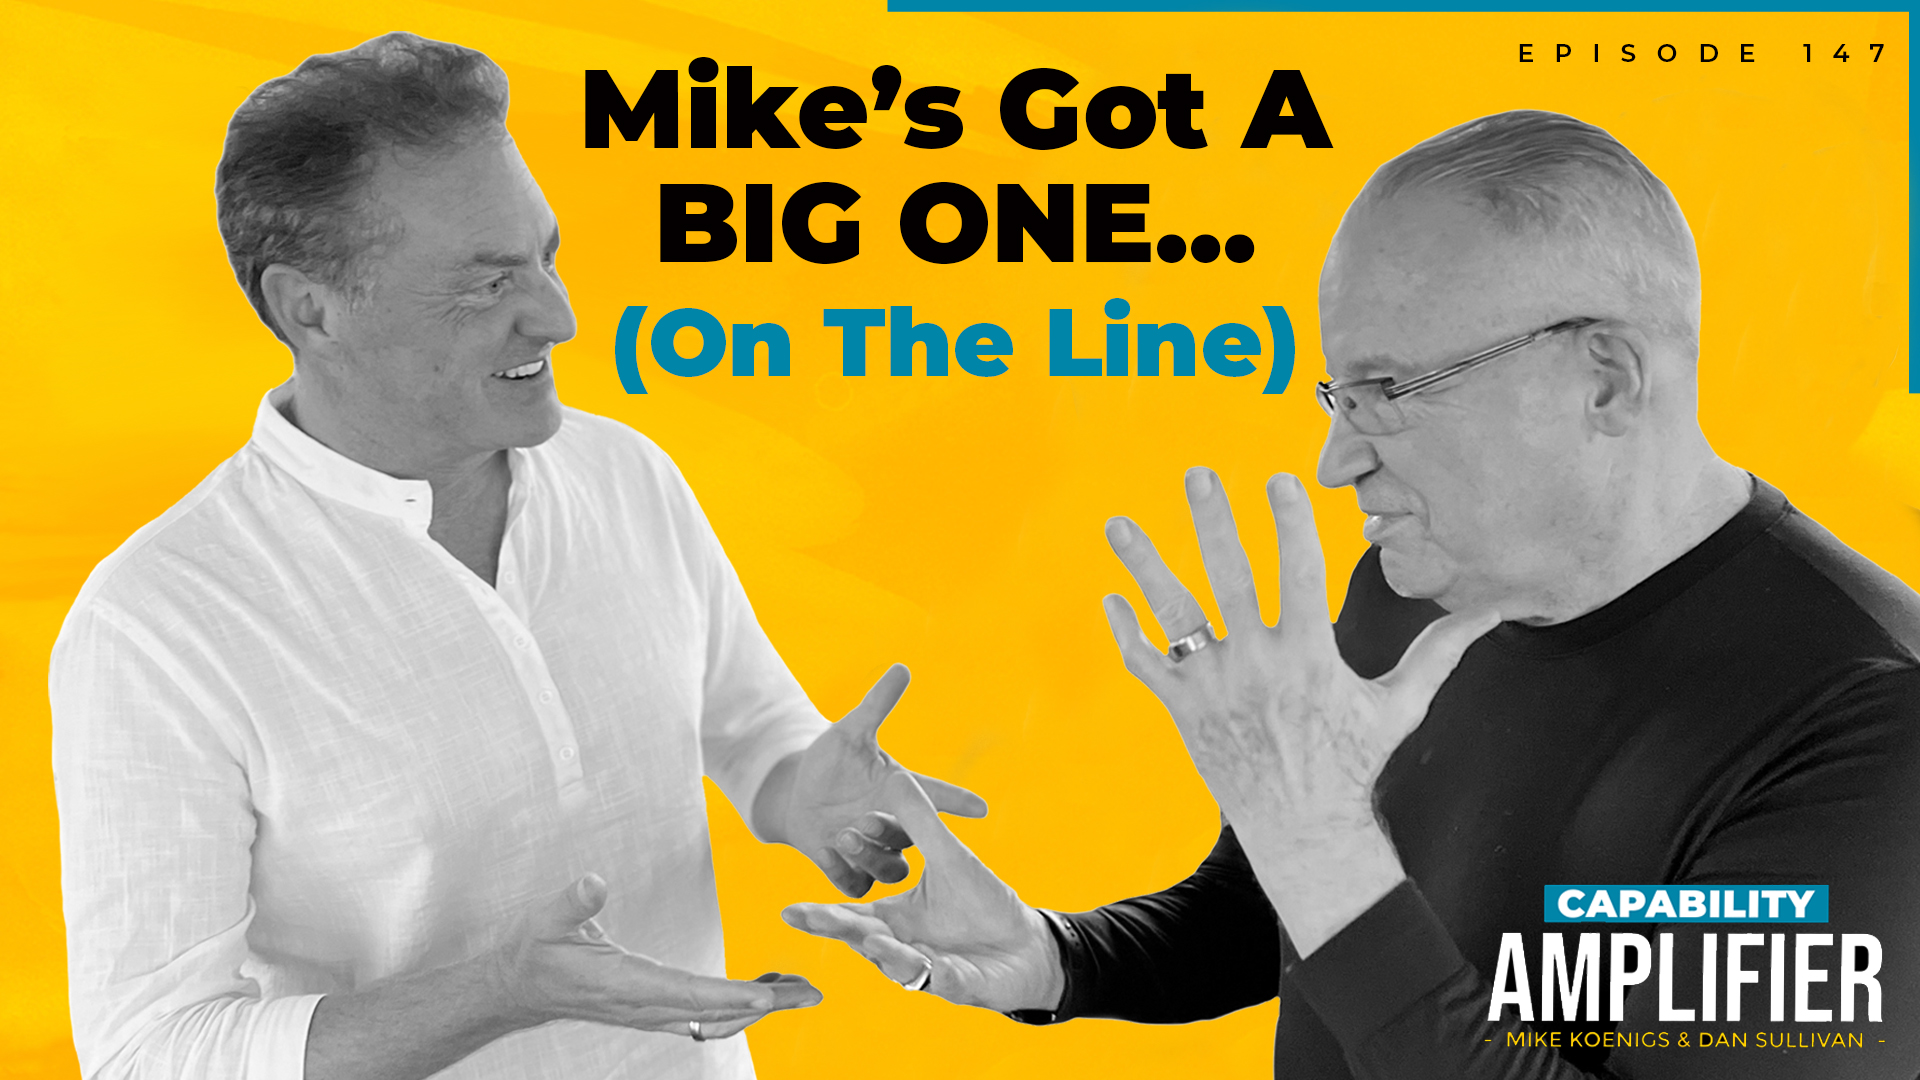 Episode 147 Art: Text reading "Mike's Got A Big One (On the Line)" on a yellow background with photos of Mike Koenigs and Dan Sullivan.